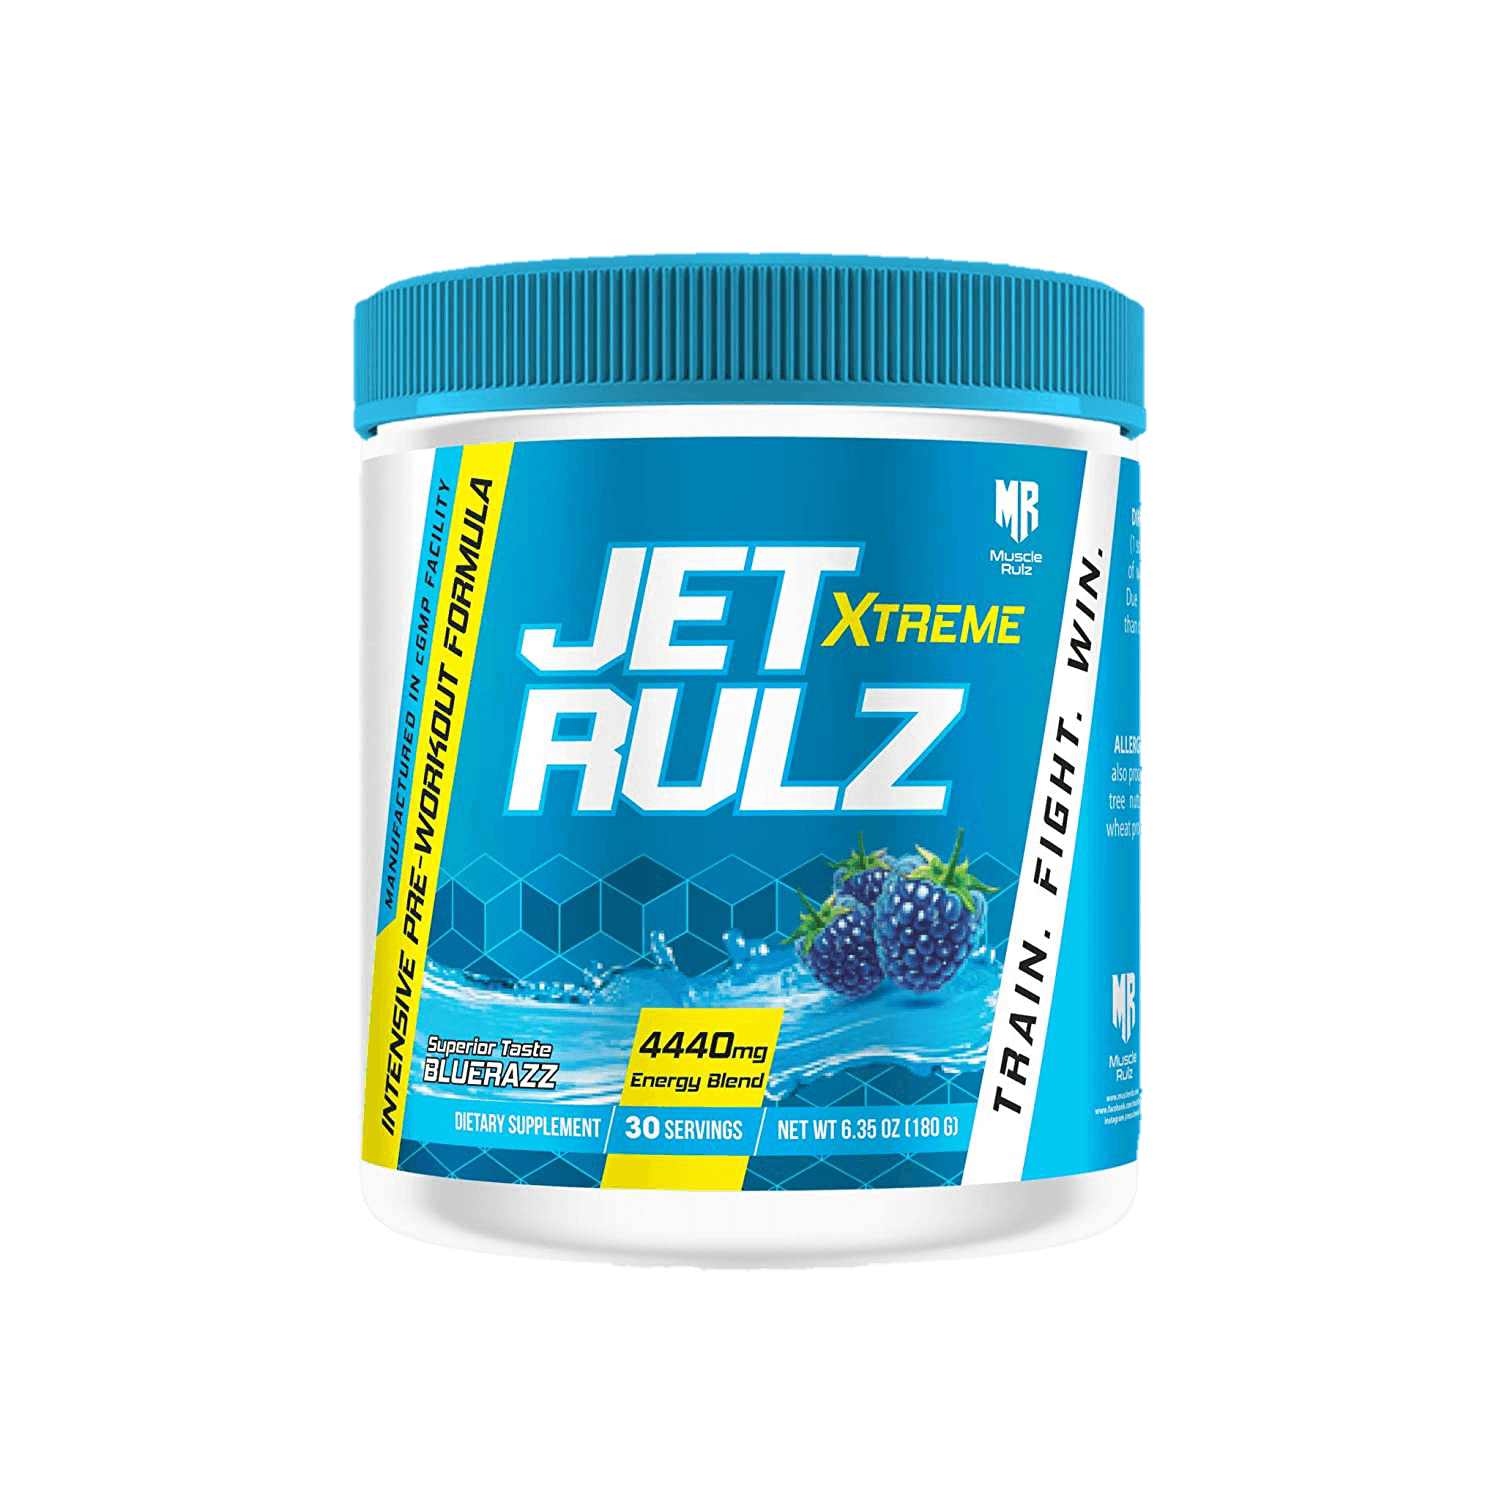 Jet Rulz Extreme - The Supplements Factory